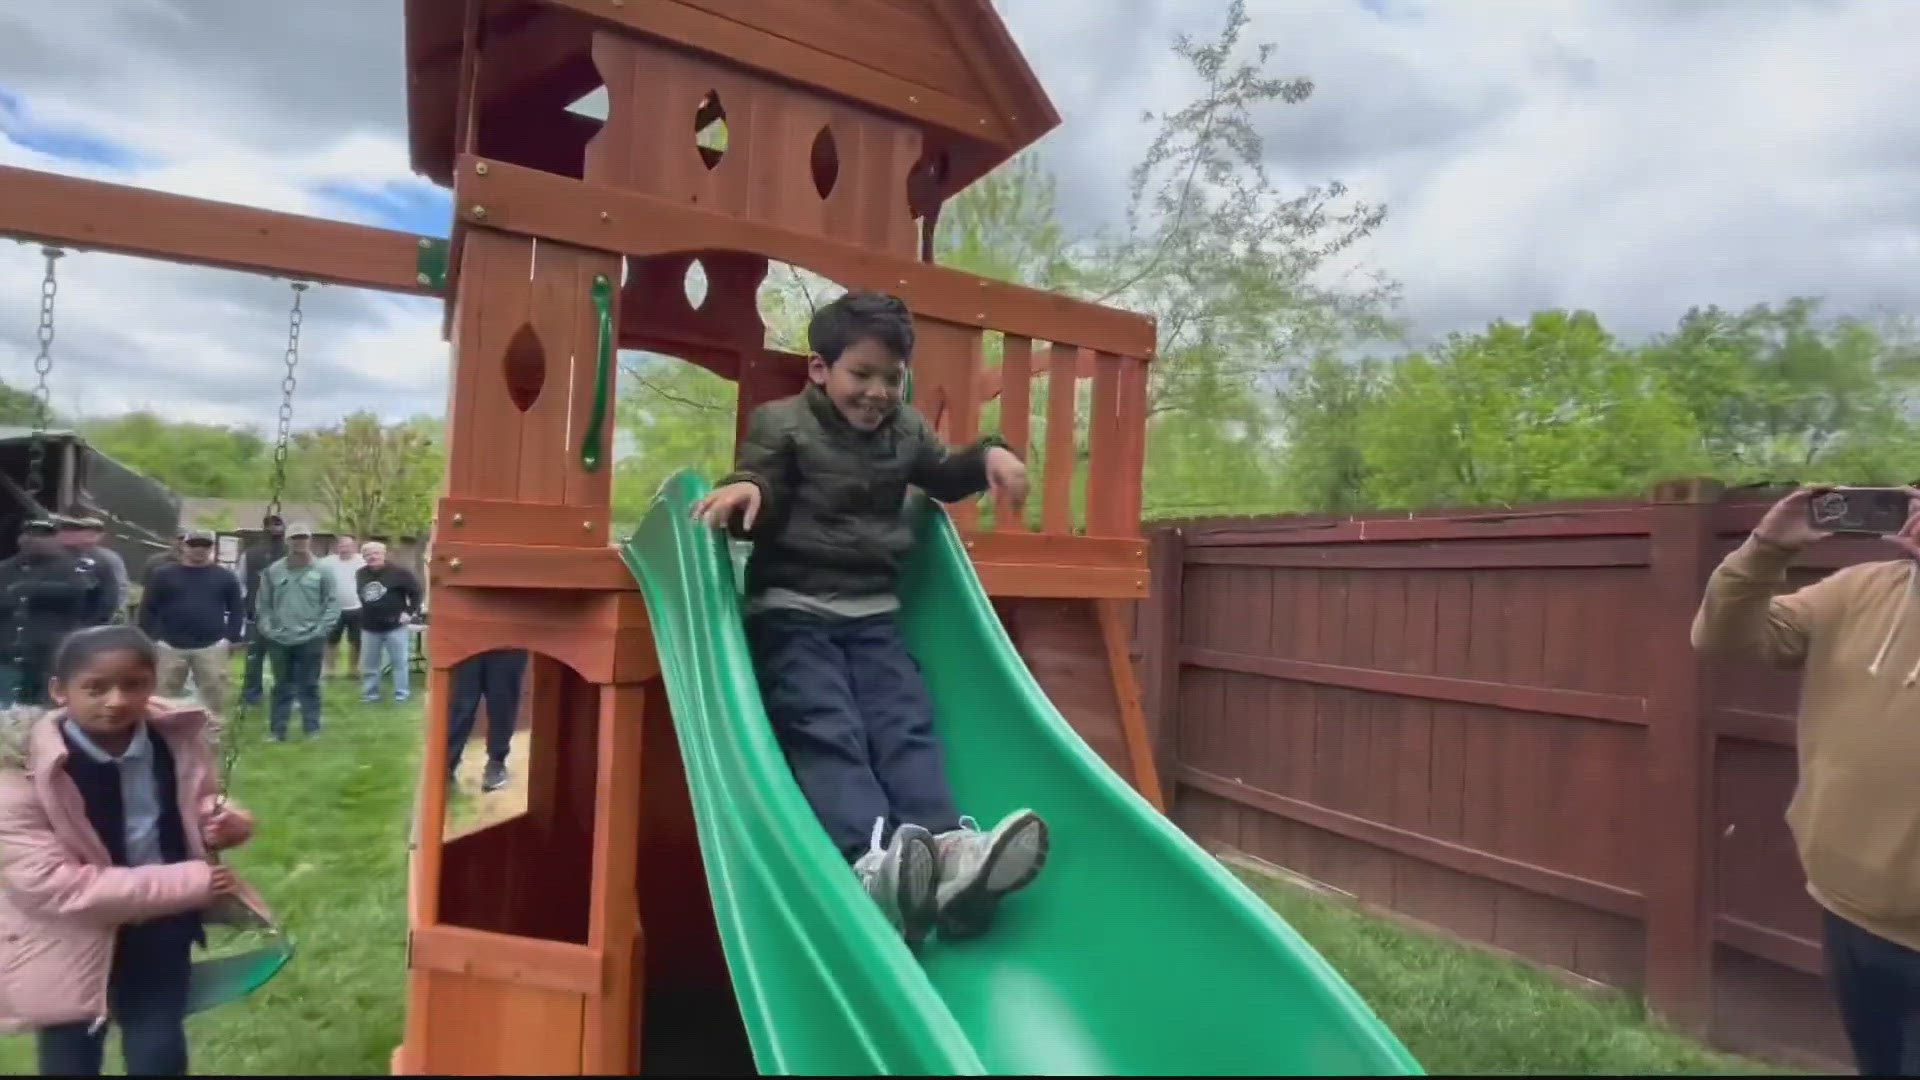 Leo is in the fight of his life, but the playset put a big smile on his face.